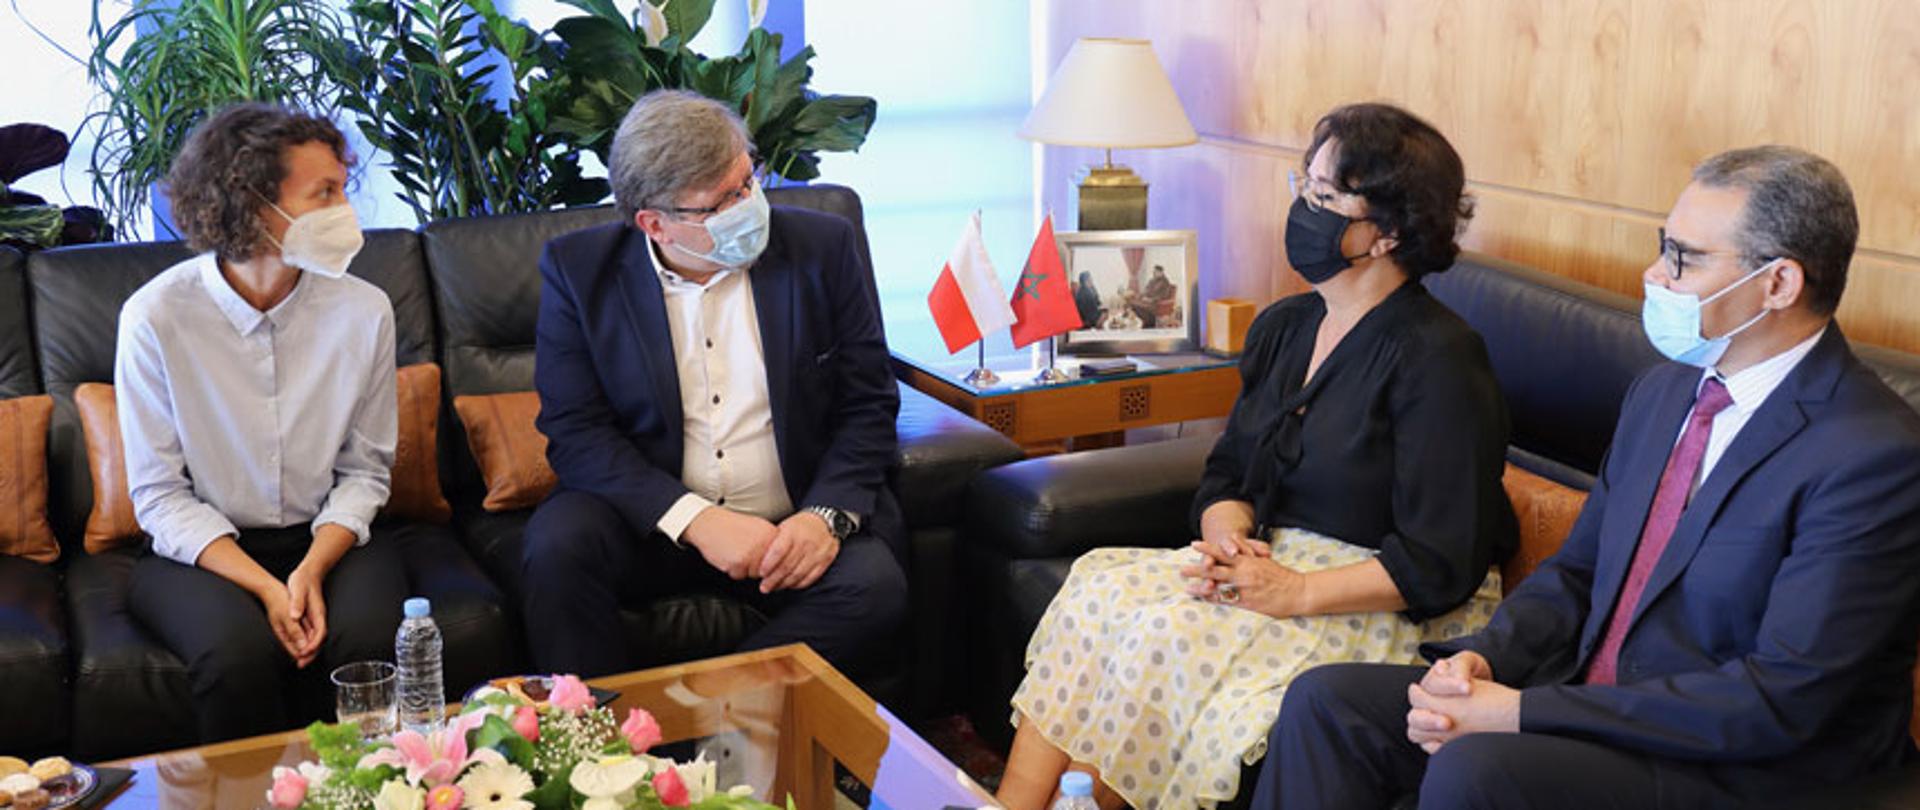 KRRiT Chairman Witold Kolodziejski and Ms Latifa Akharbach, President of the High Council for Audiovisual Communication (HACA)